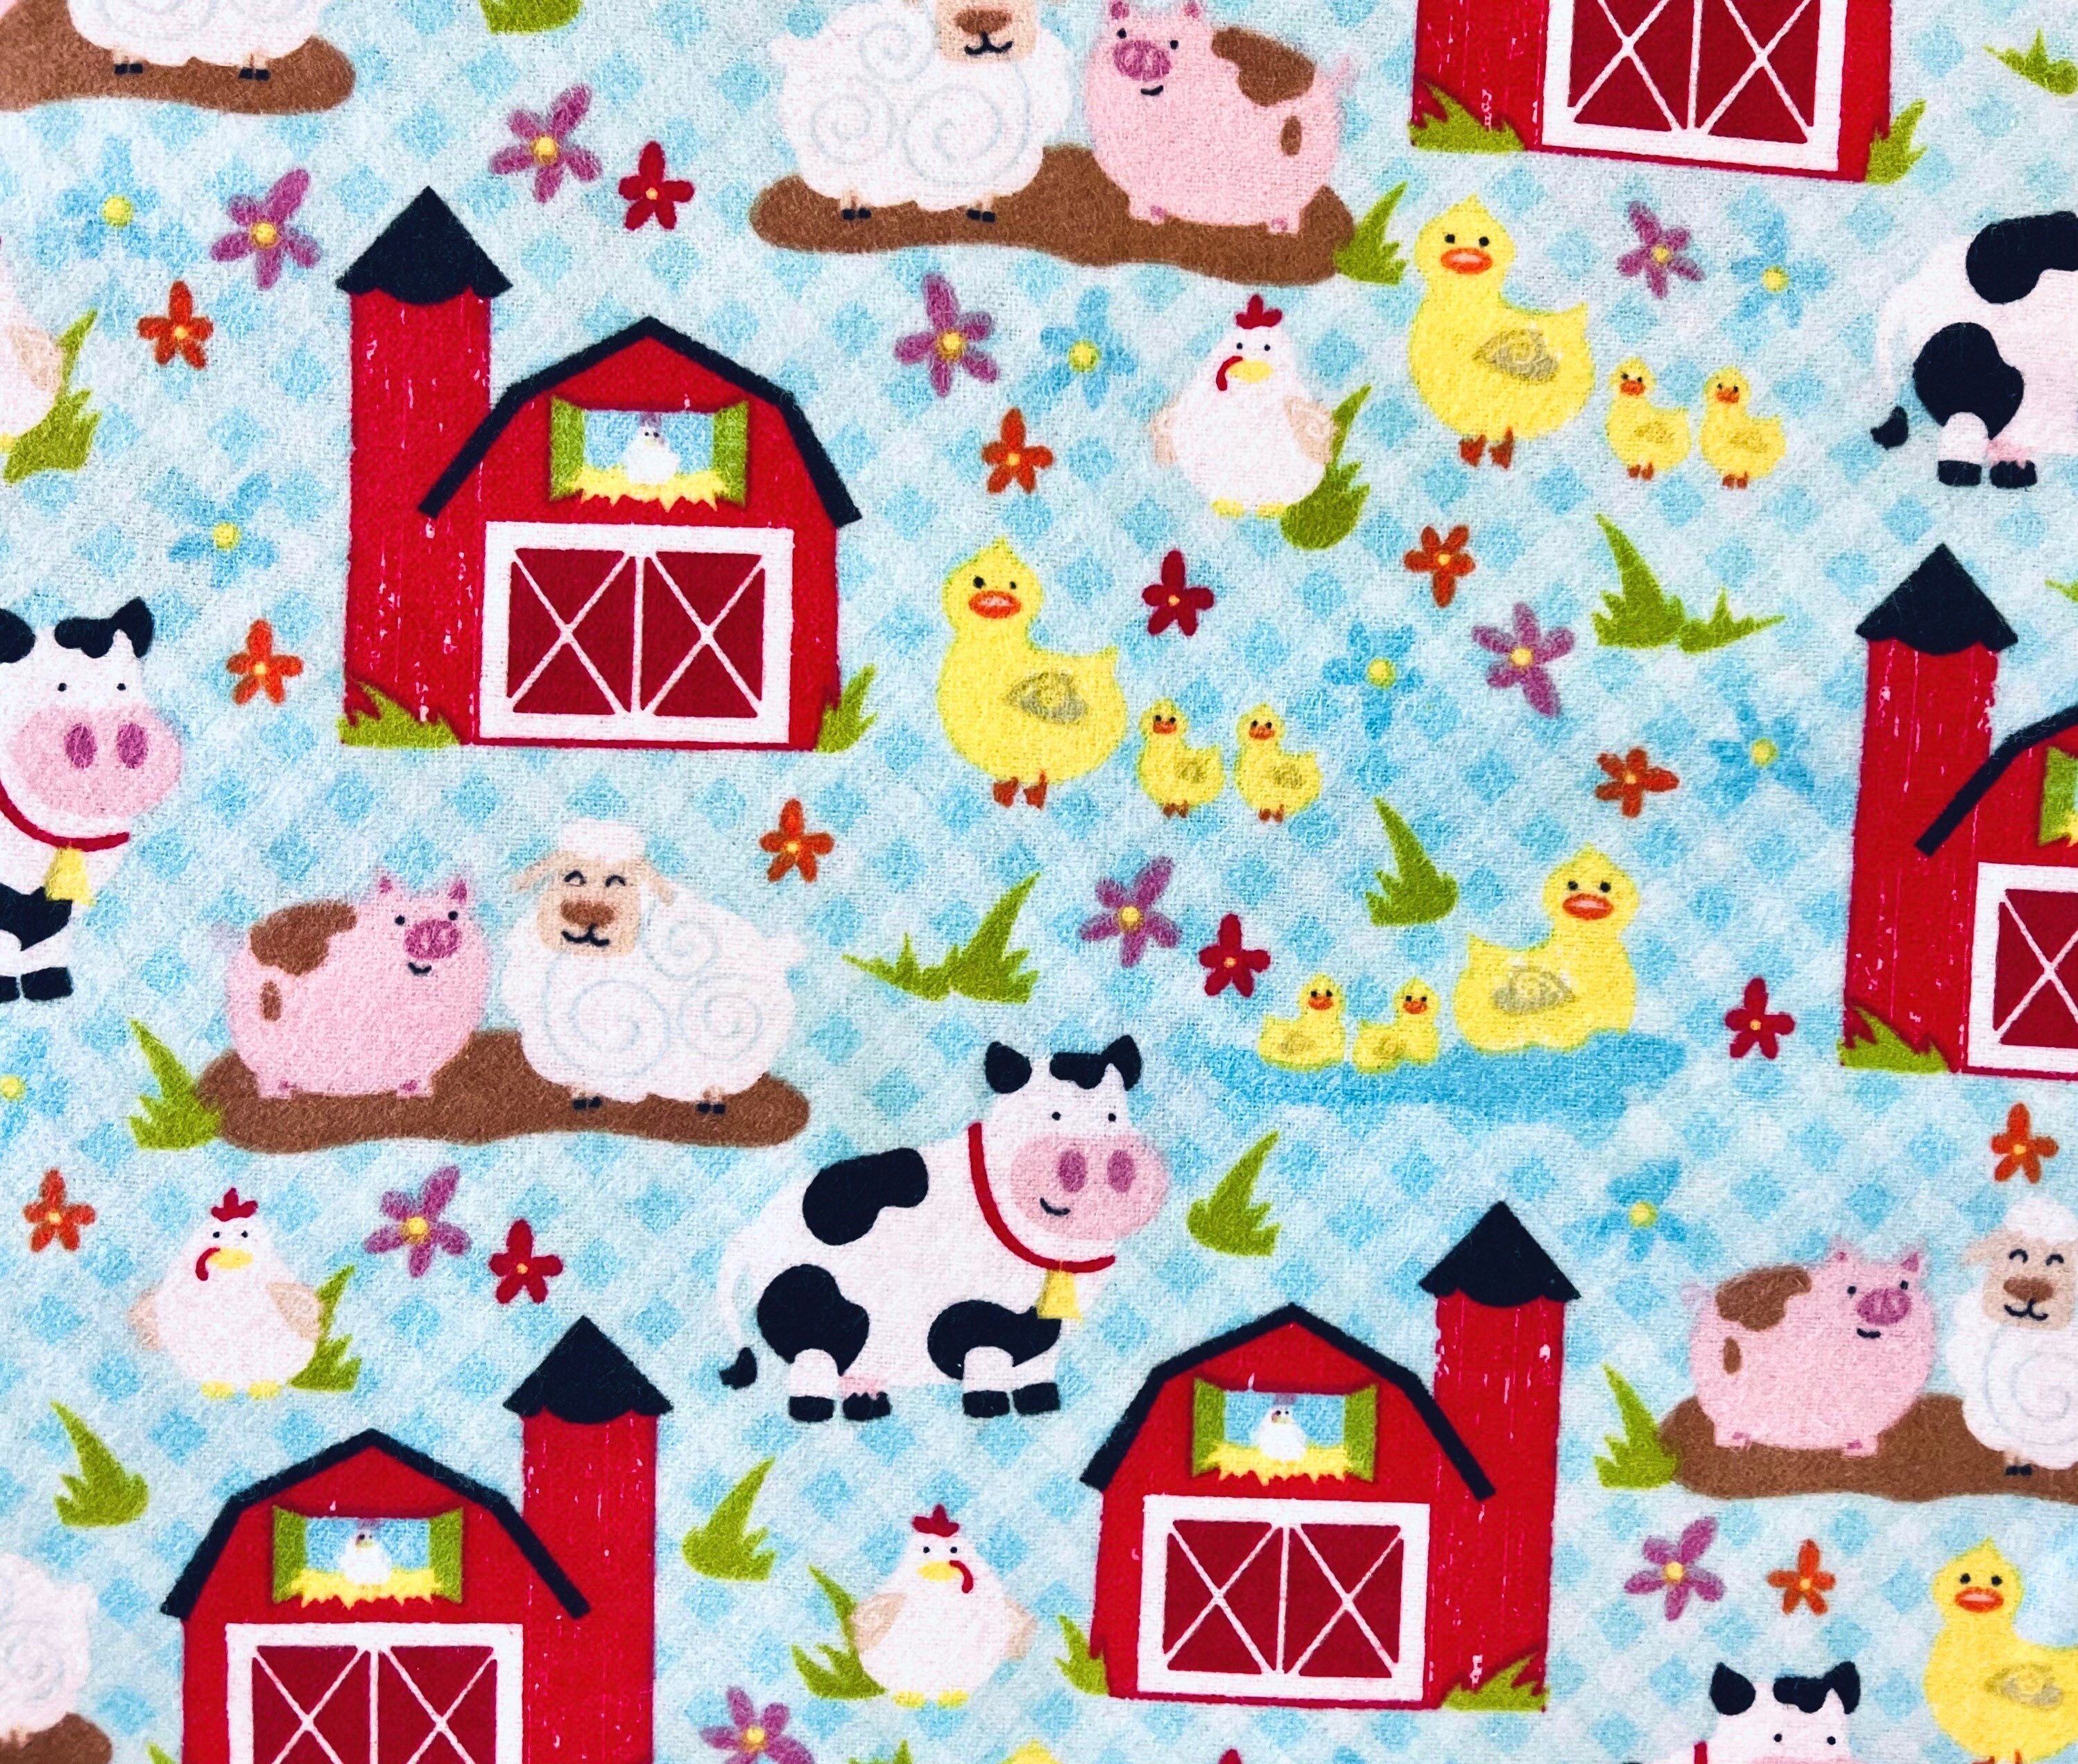 Sleeping Sheep on Clouds Flannel Fabric by the Yard or Half Yards